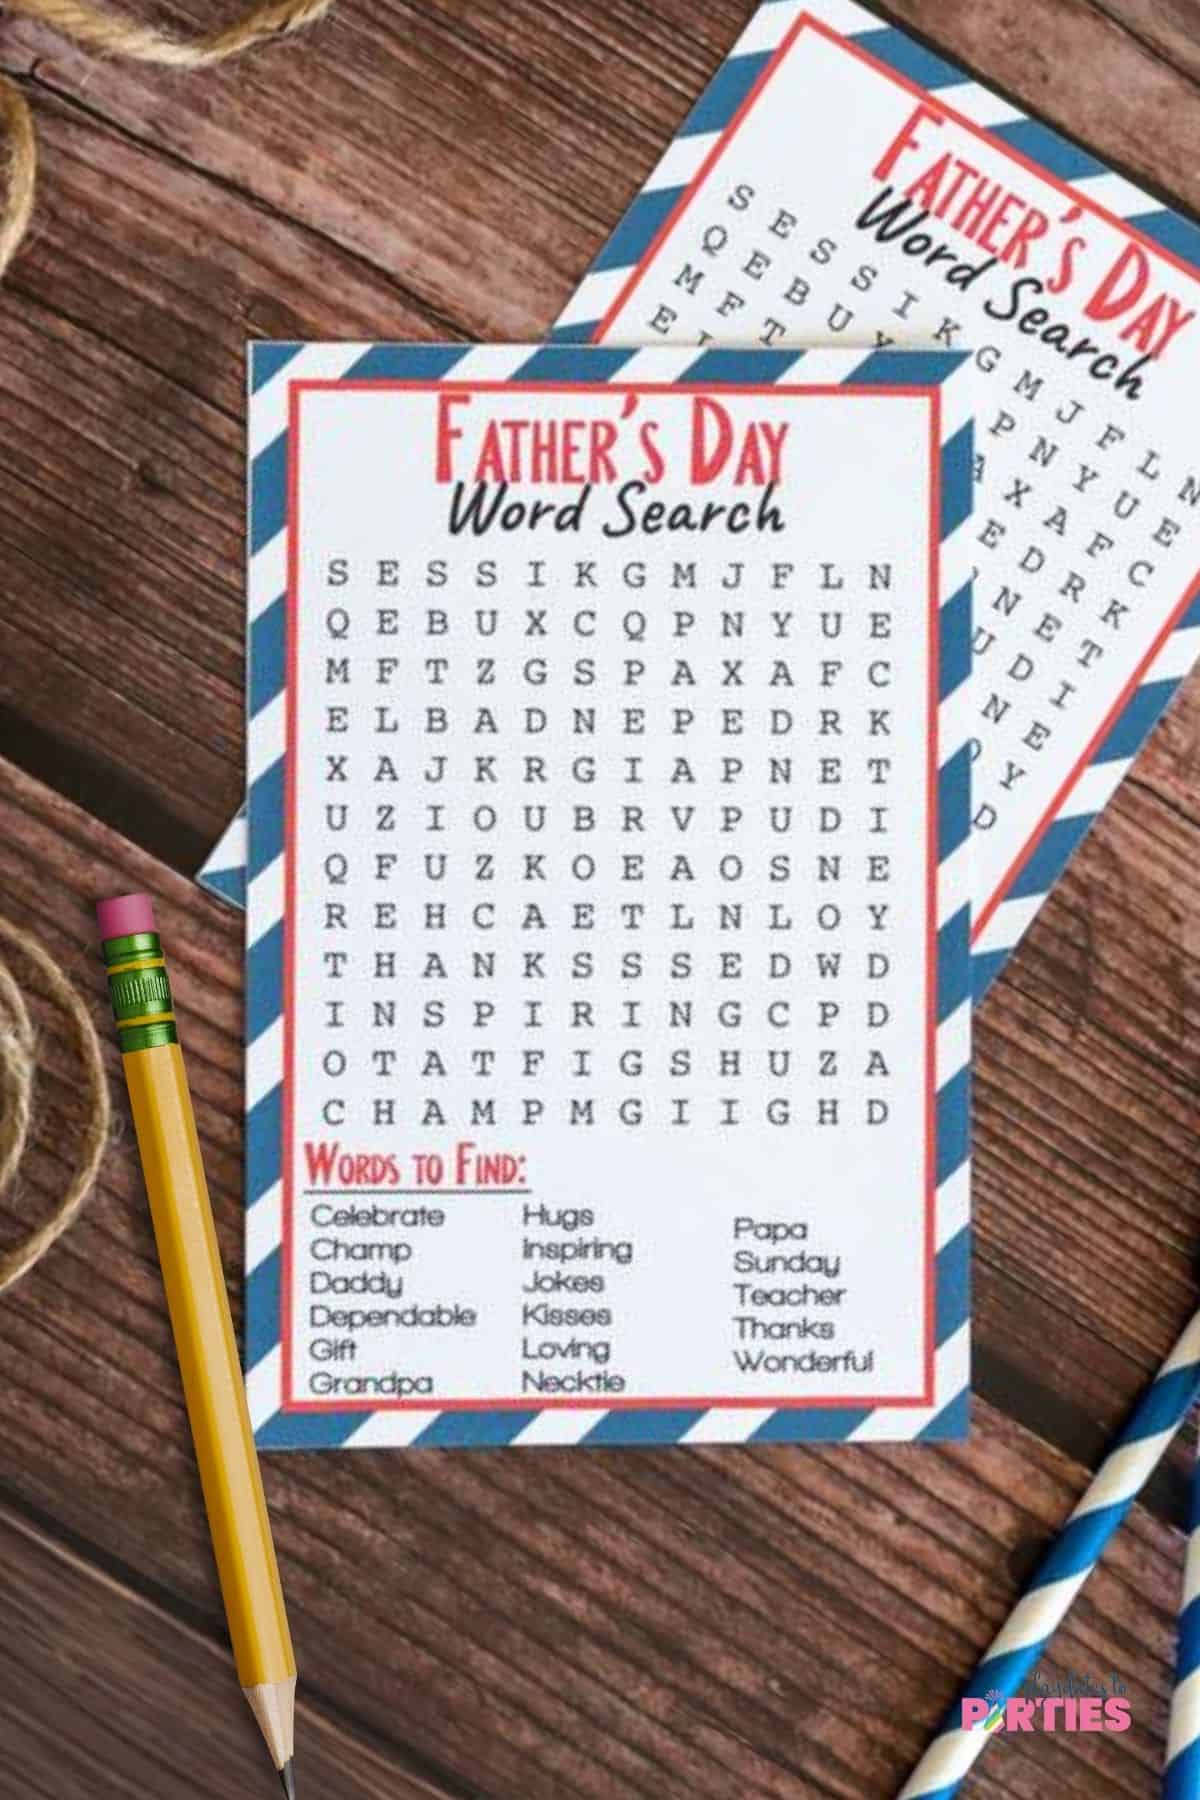 Free printable Father's Day word search puzzles for kids.